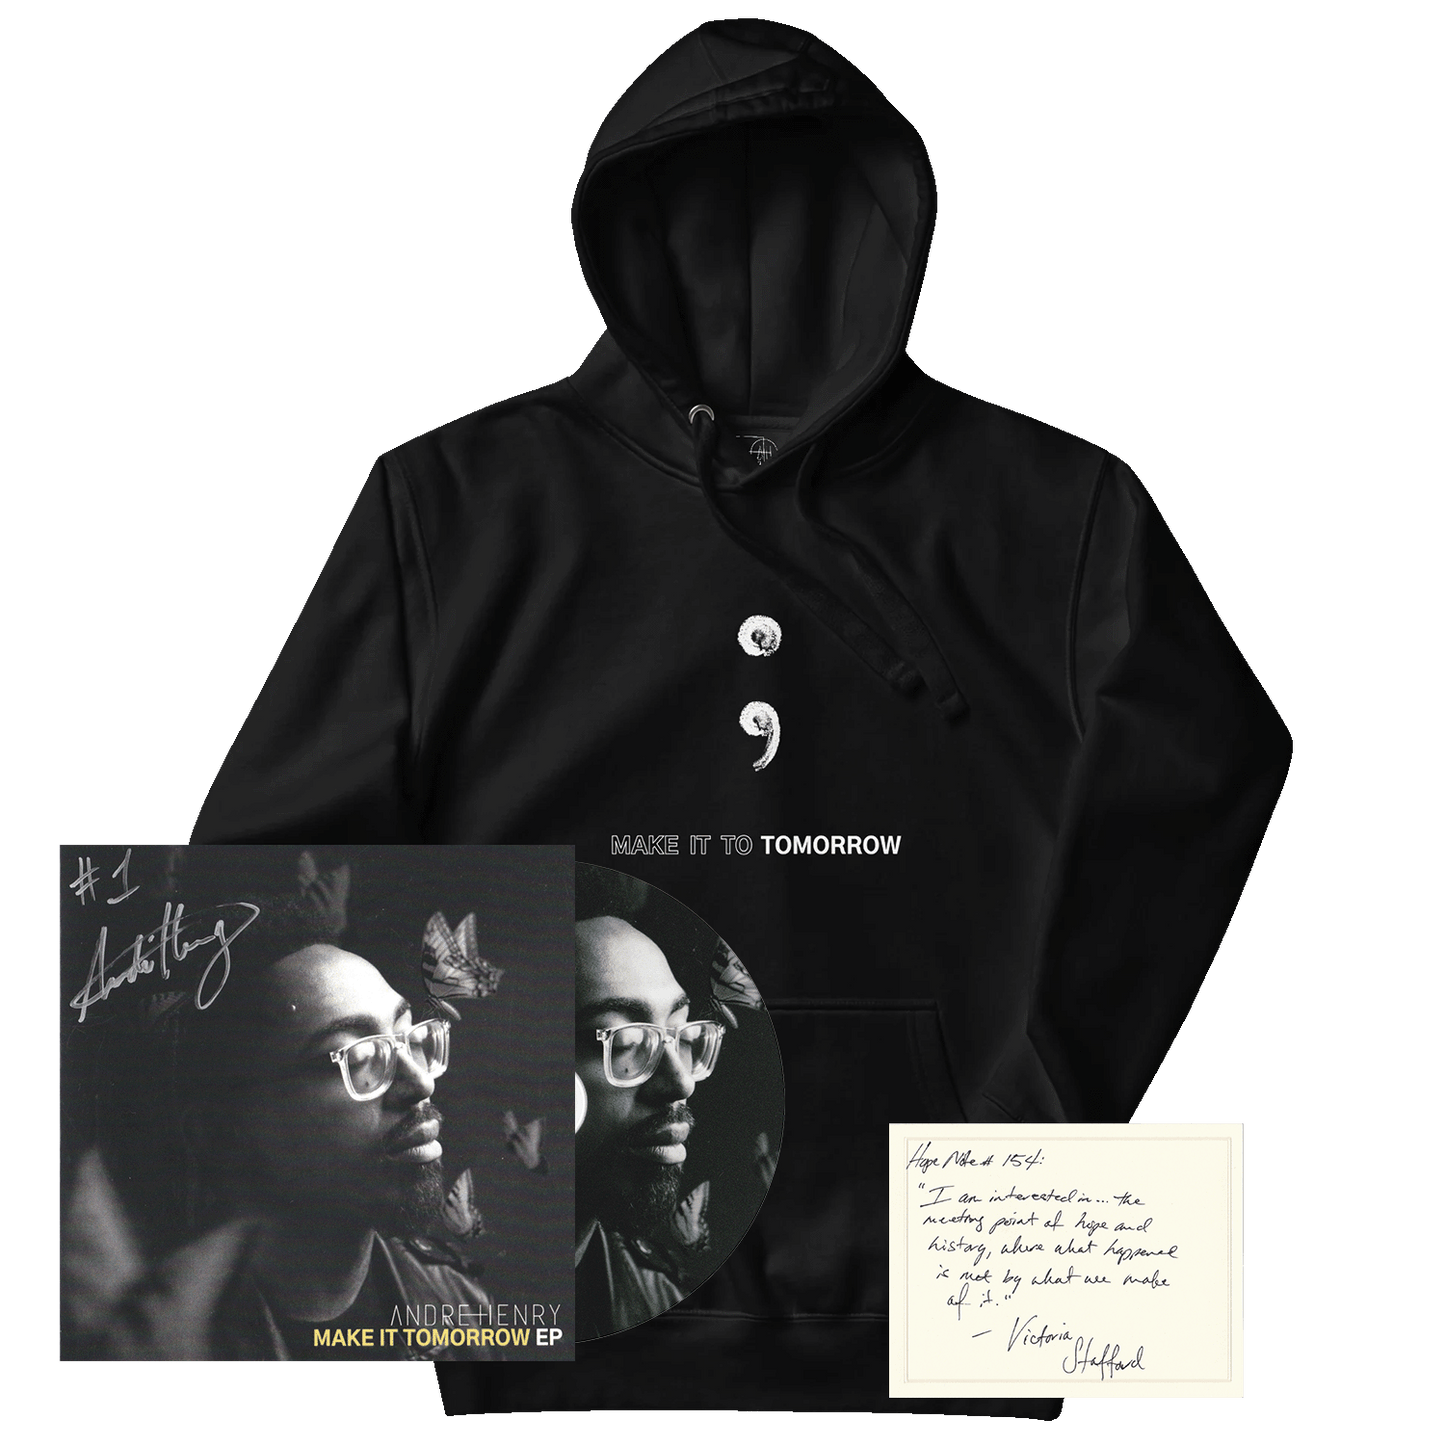 Make It To Tomorrow EP - Limited Edition Signed CD + Hoodie Bundle